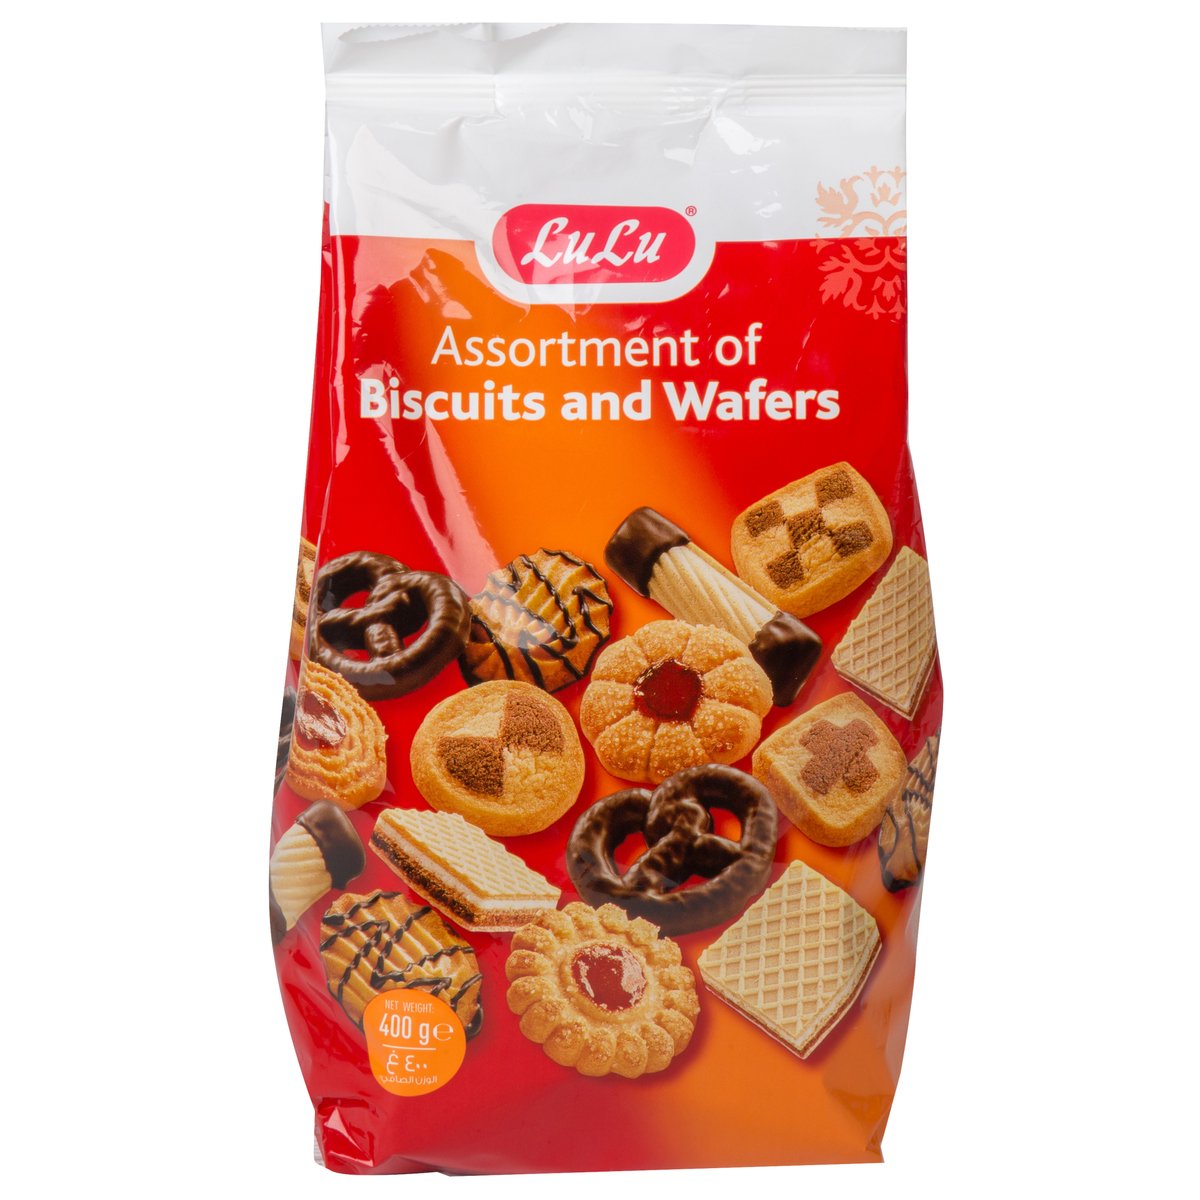 LuLu Assortment Of Biscuits And Wafers 400g